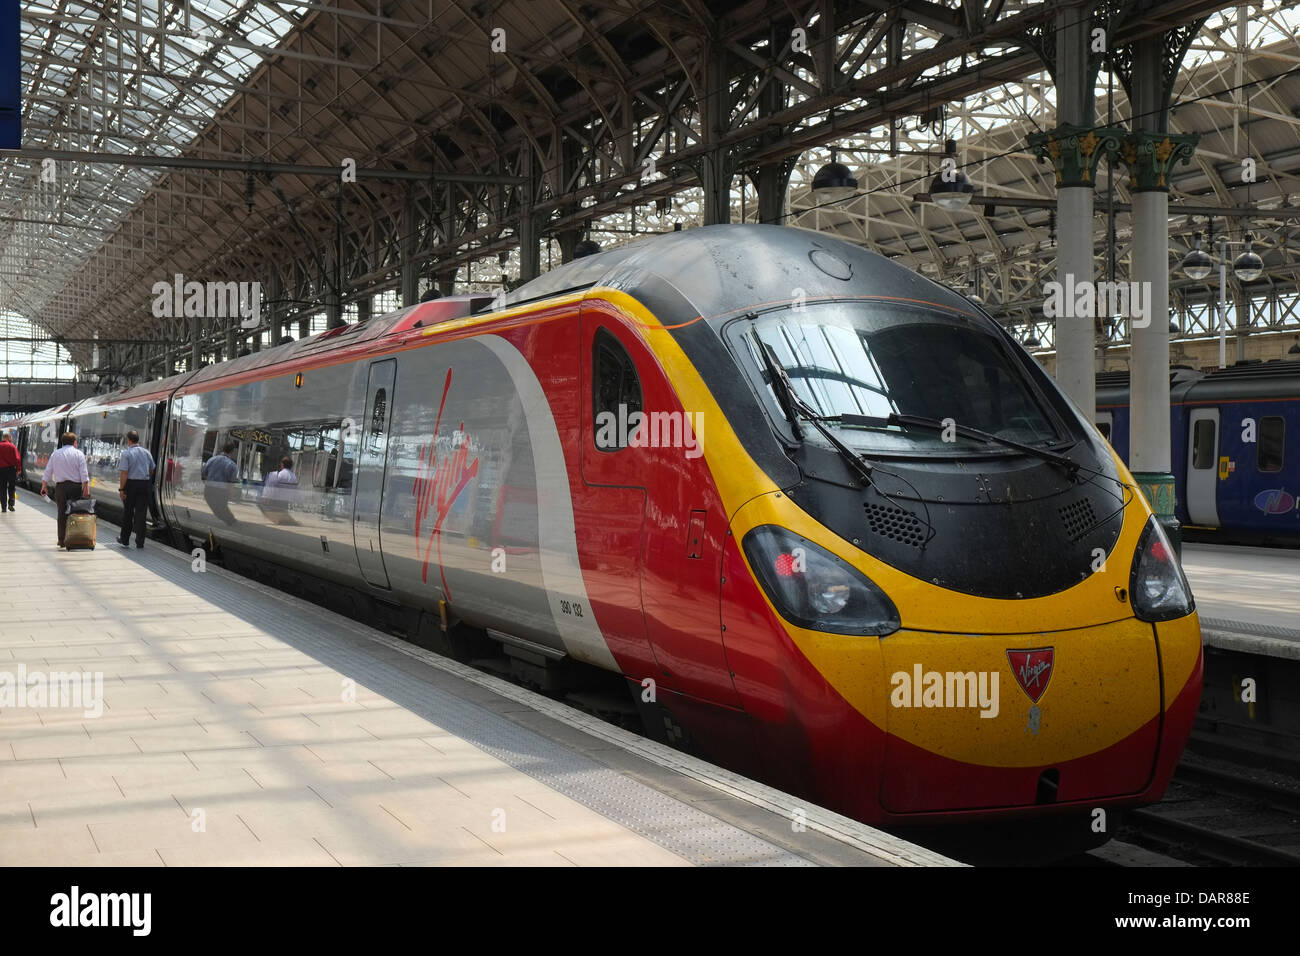 England, Manchester, Piccadilly Rail Station, Virgin Train Stock Photo